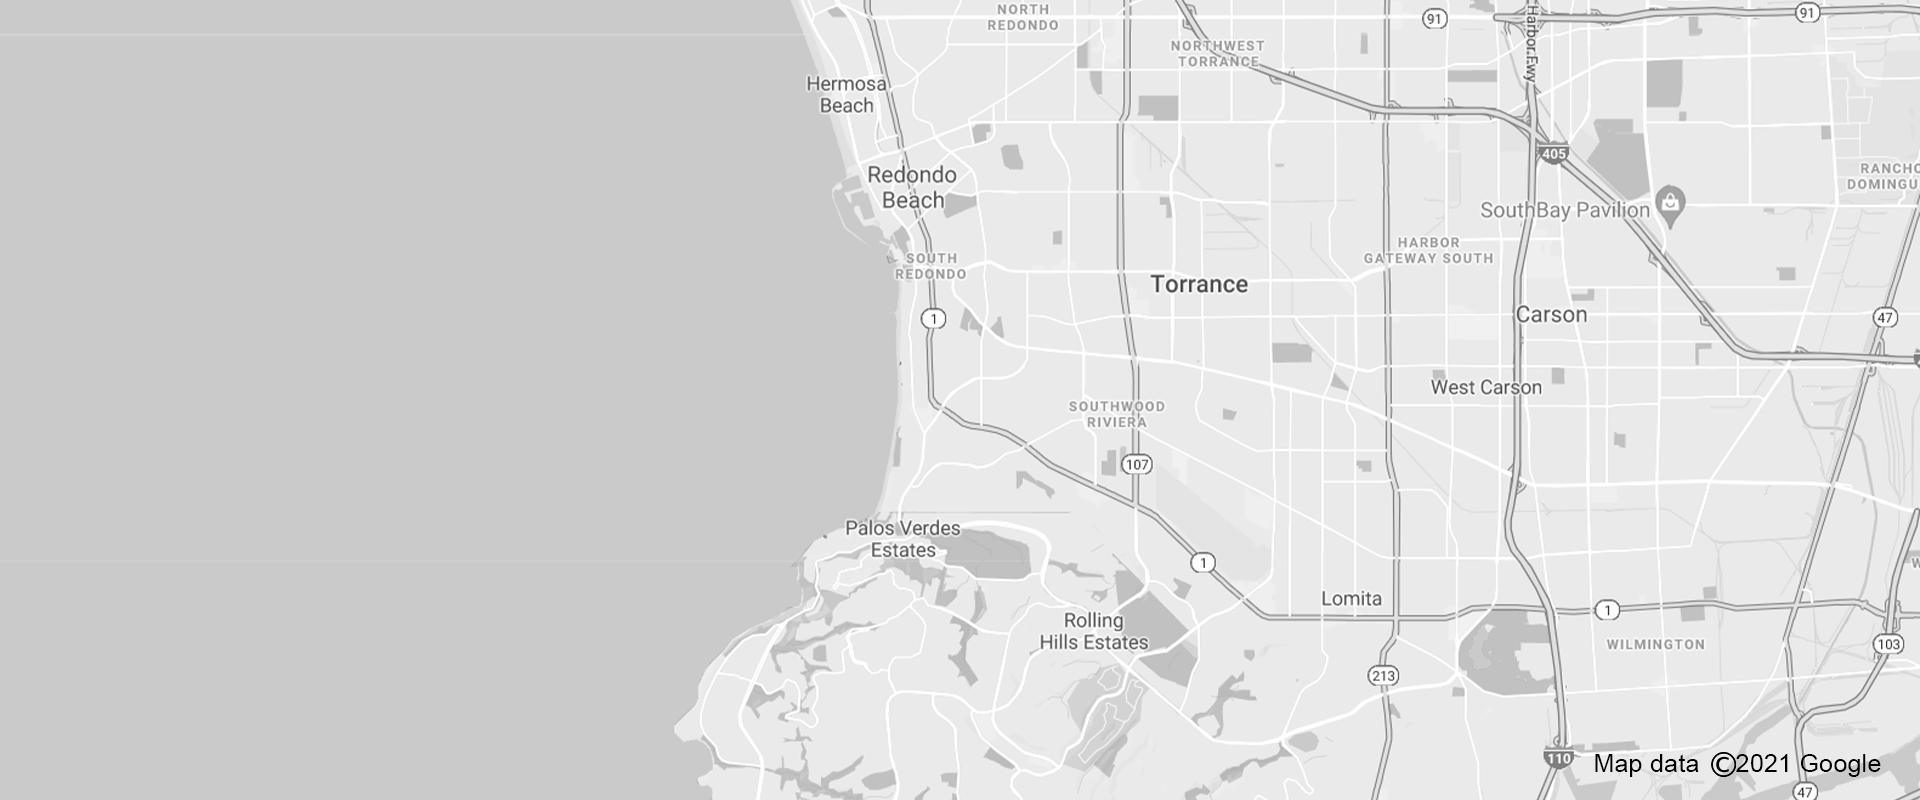 map of torrance